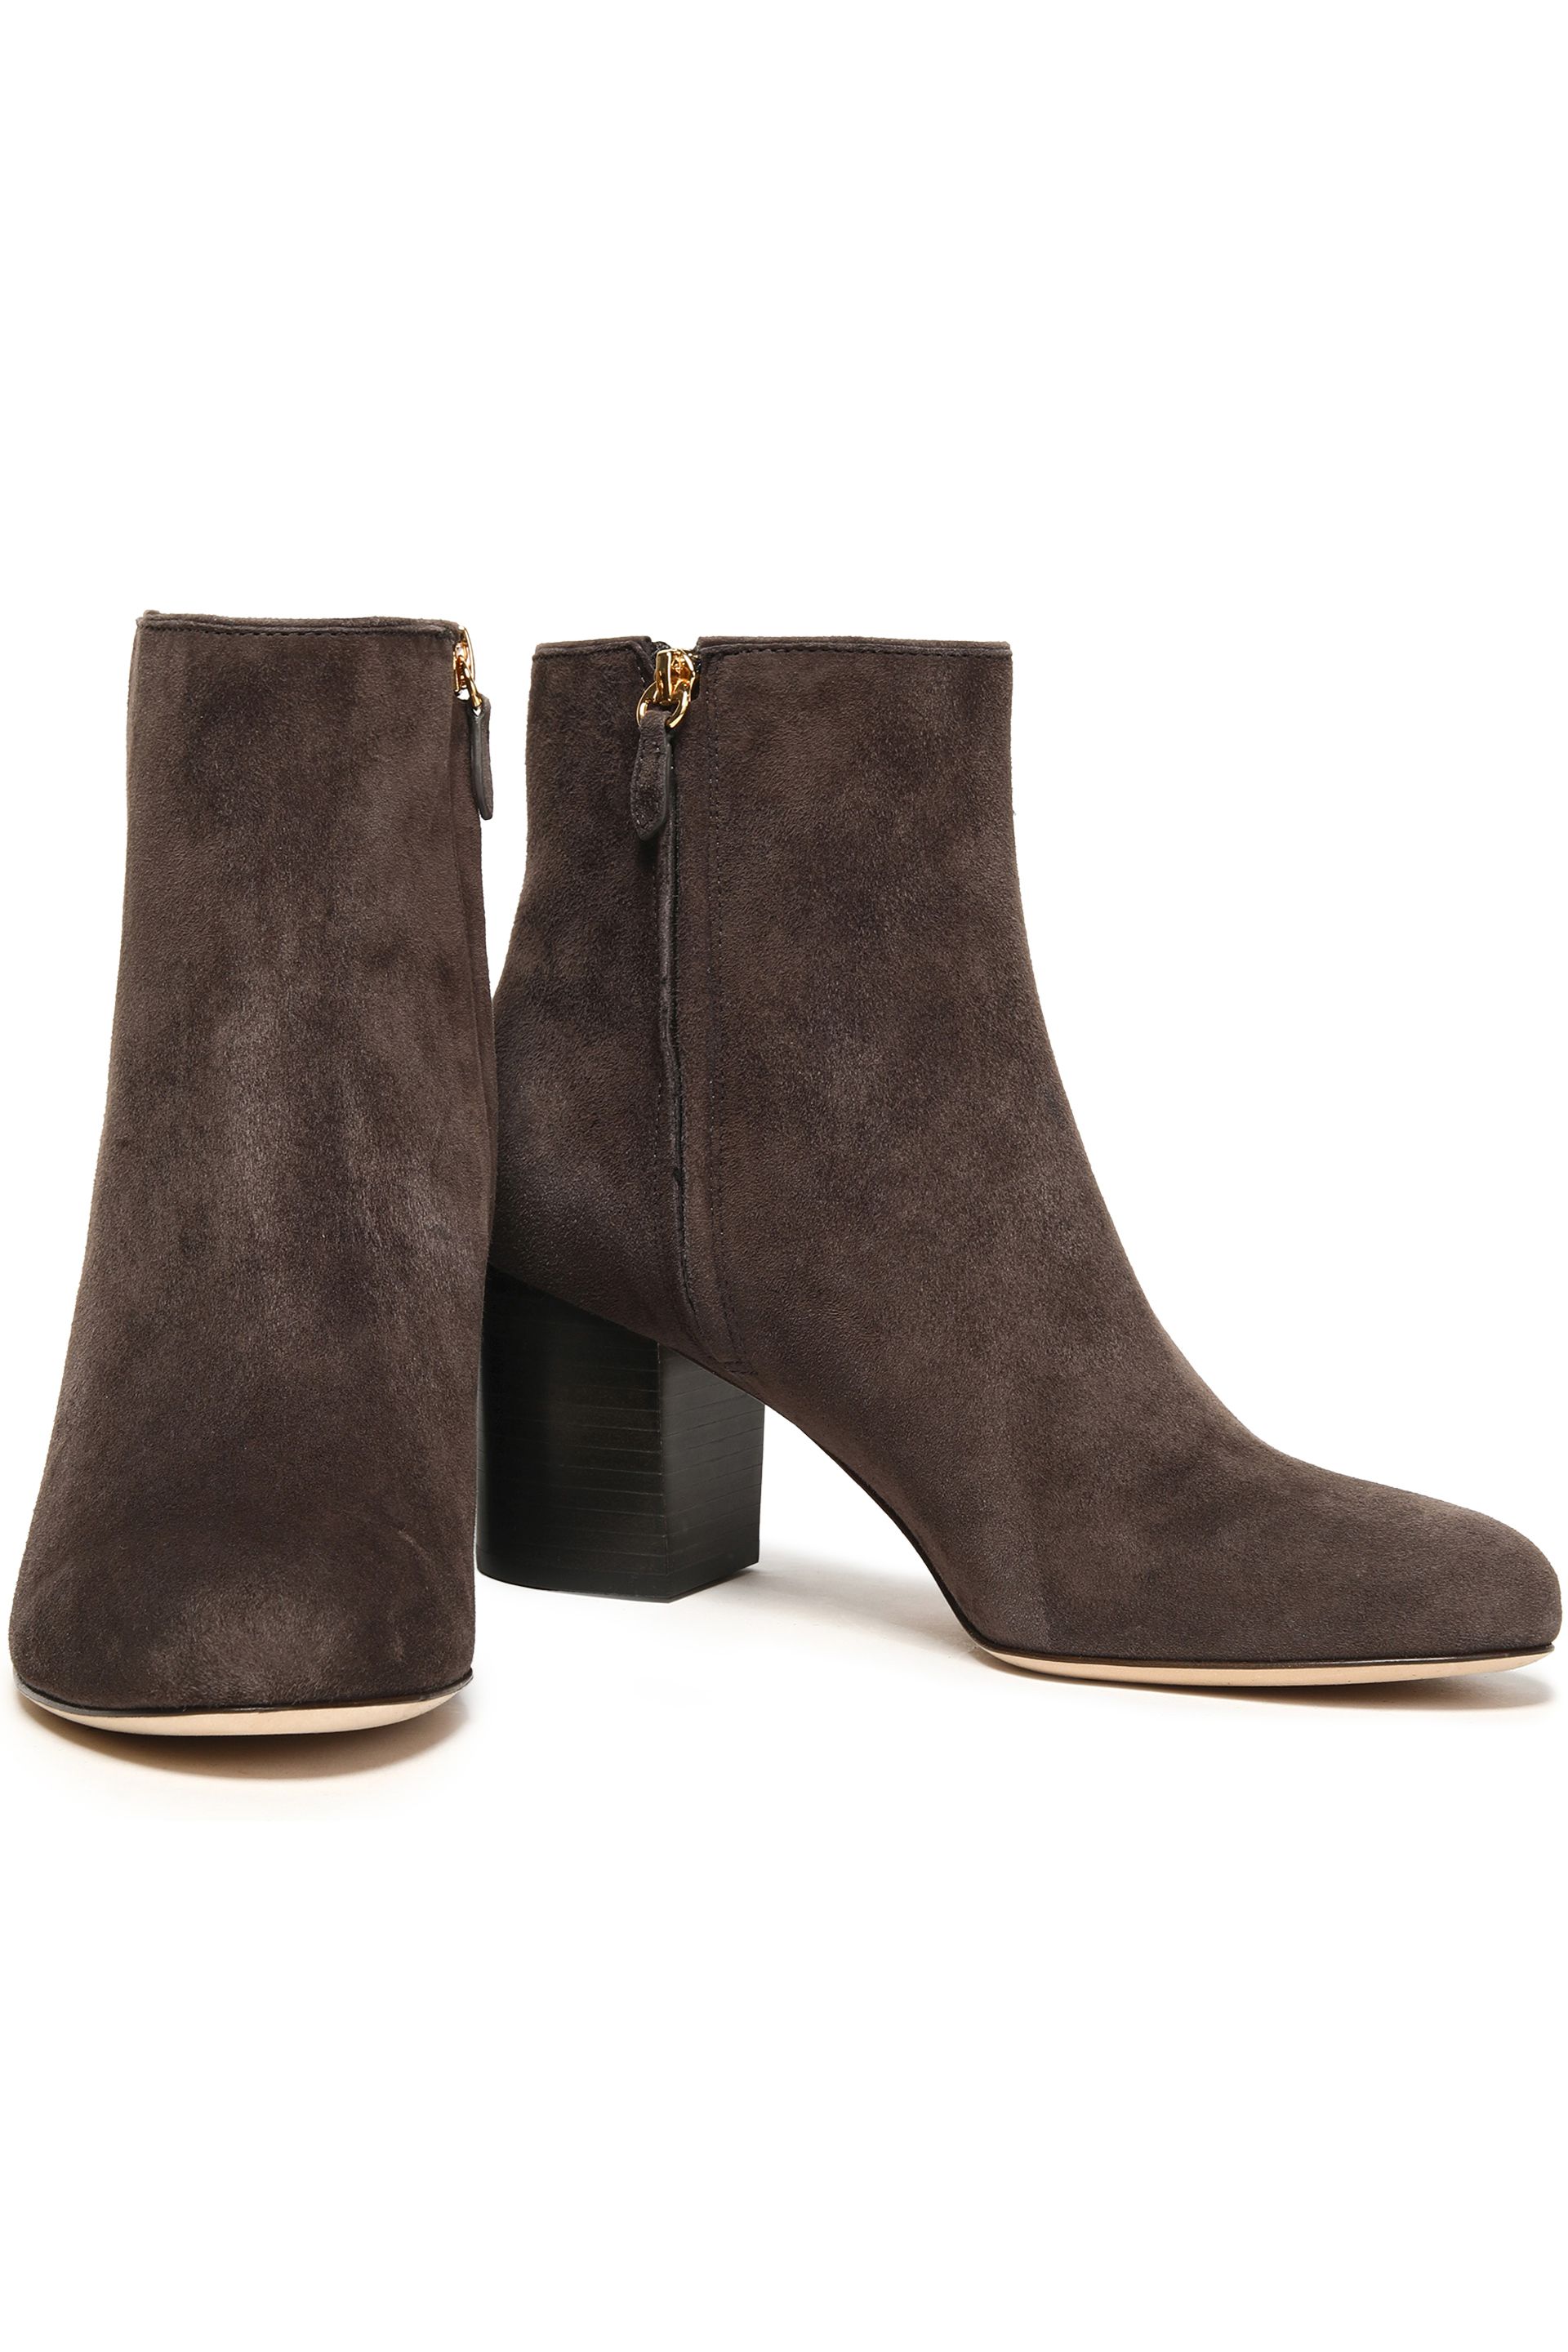 Designer Boots | Sale up to 70% off | THE OUTNET